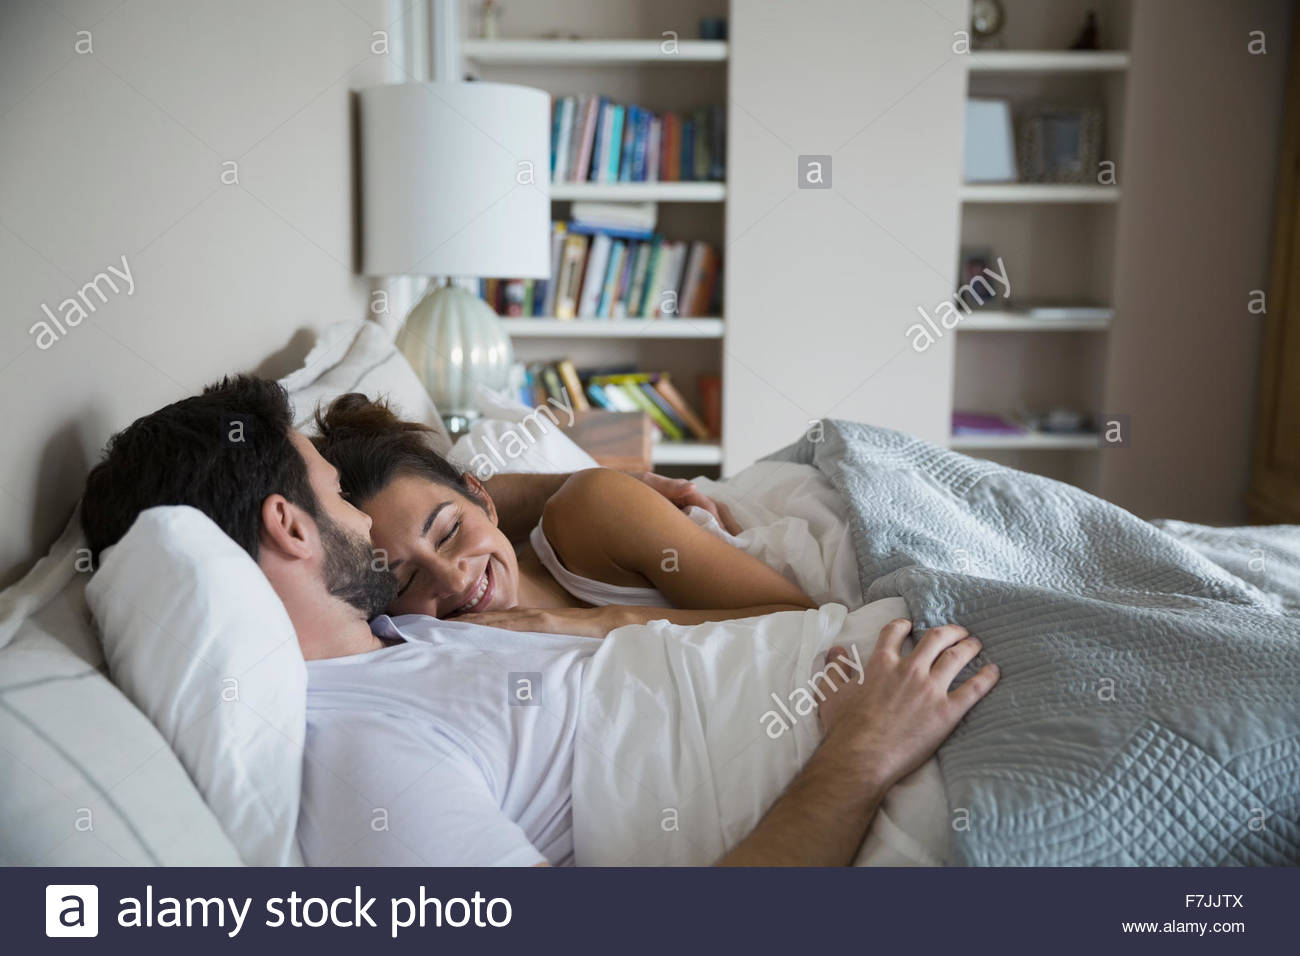 Affectionate couple cuddling in bed Stock Photo